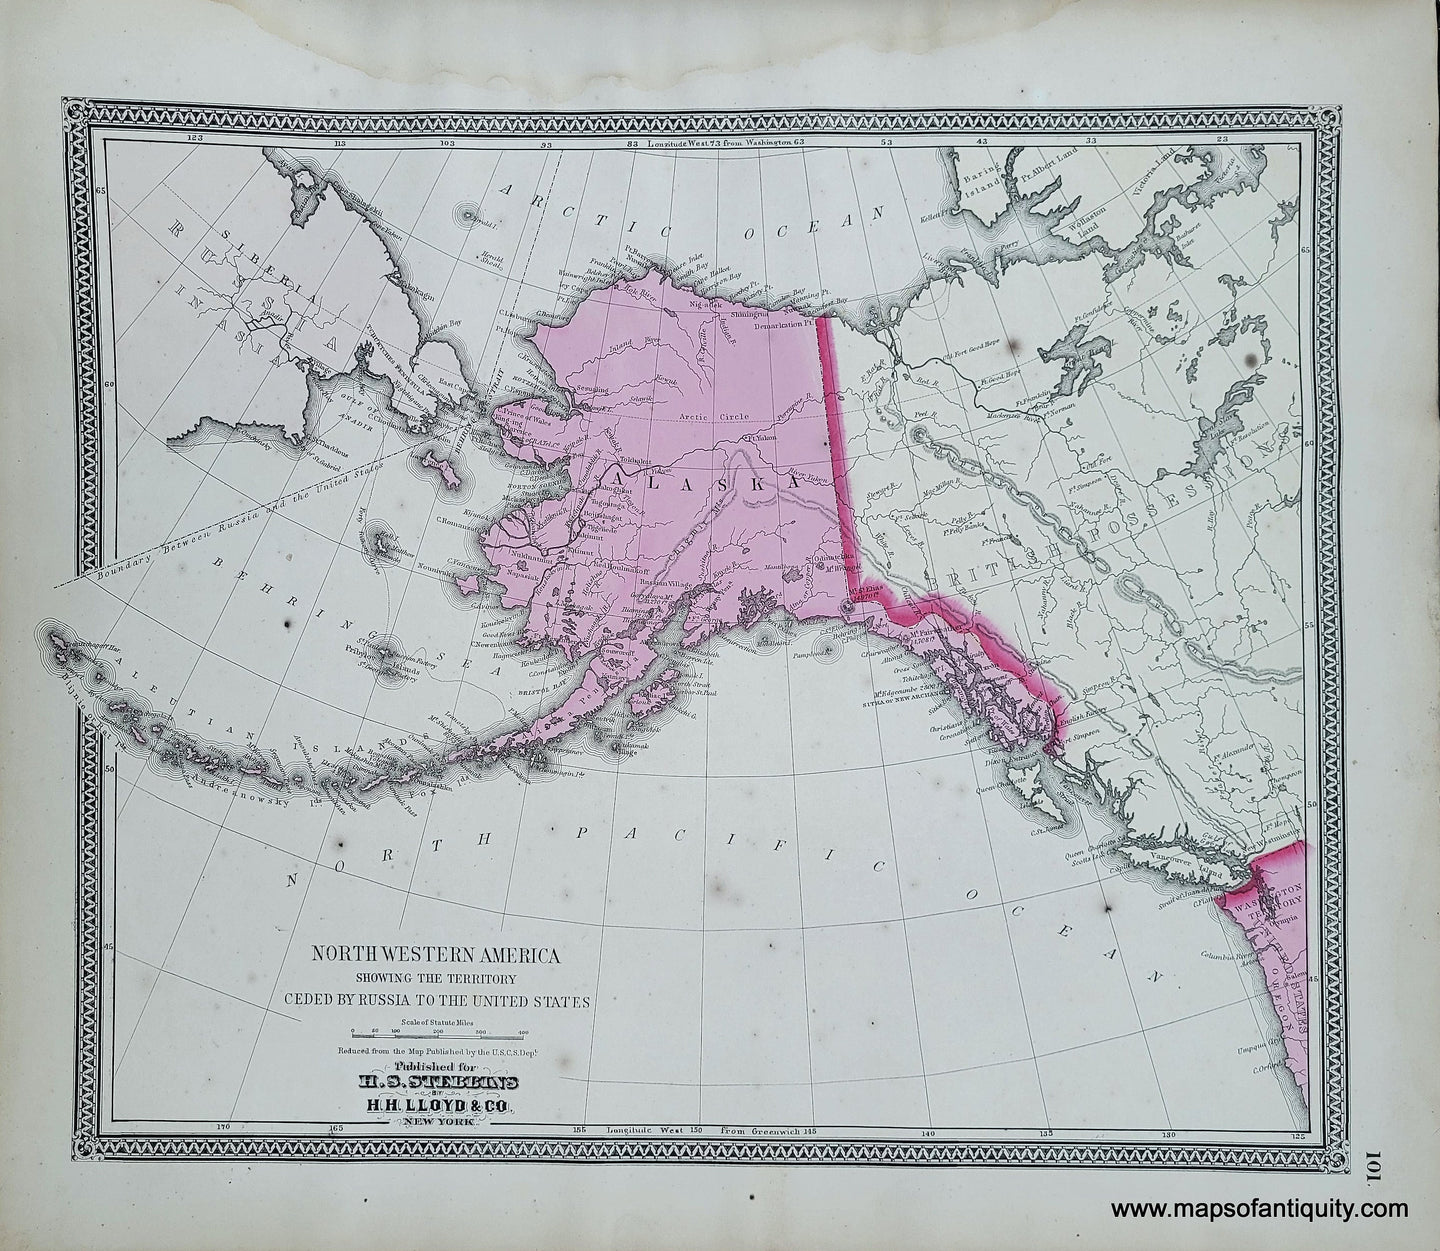 Genuine-Antique-Hand-colored-Map-Northwestern-America-showing-the-Territory-Ceded-by-Russia-to-the-United-States-1868-Stebbins-Lloyd-Maps-Of-Antiquity